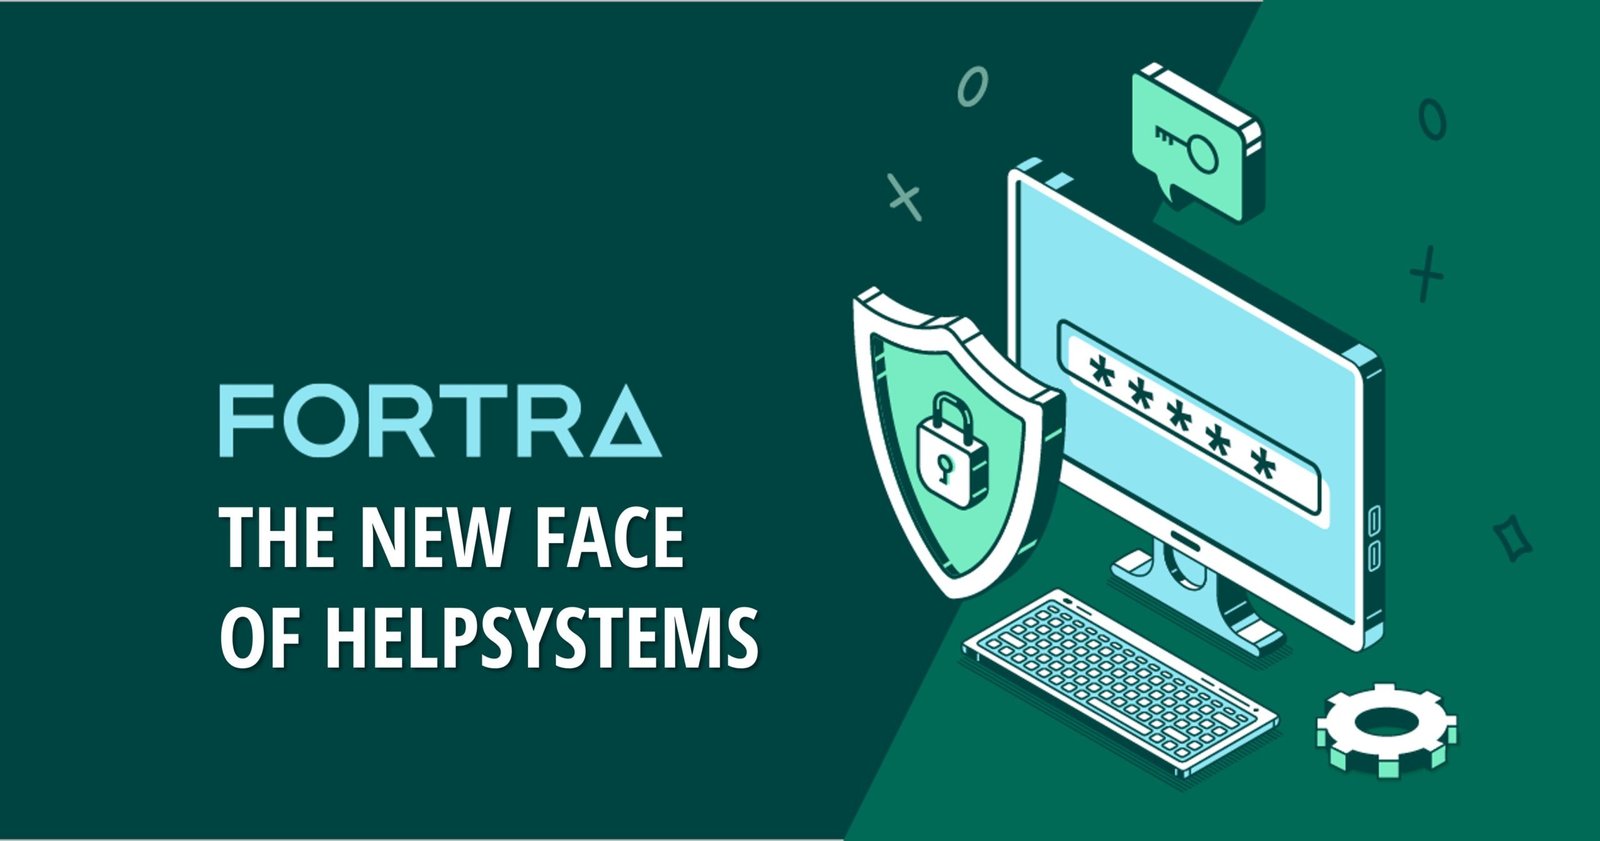 HelpSystems is now Fortra